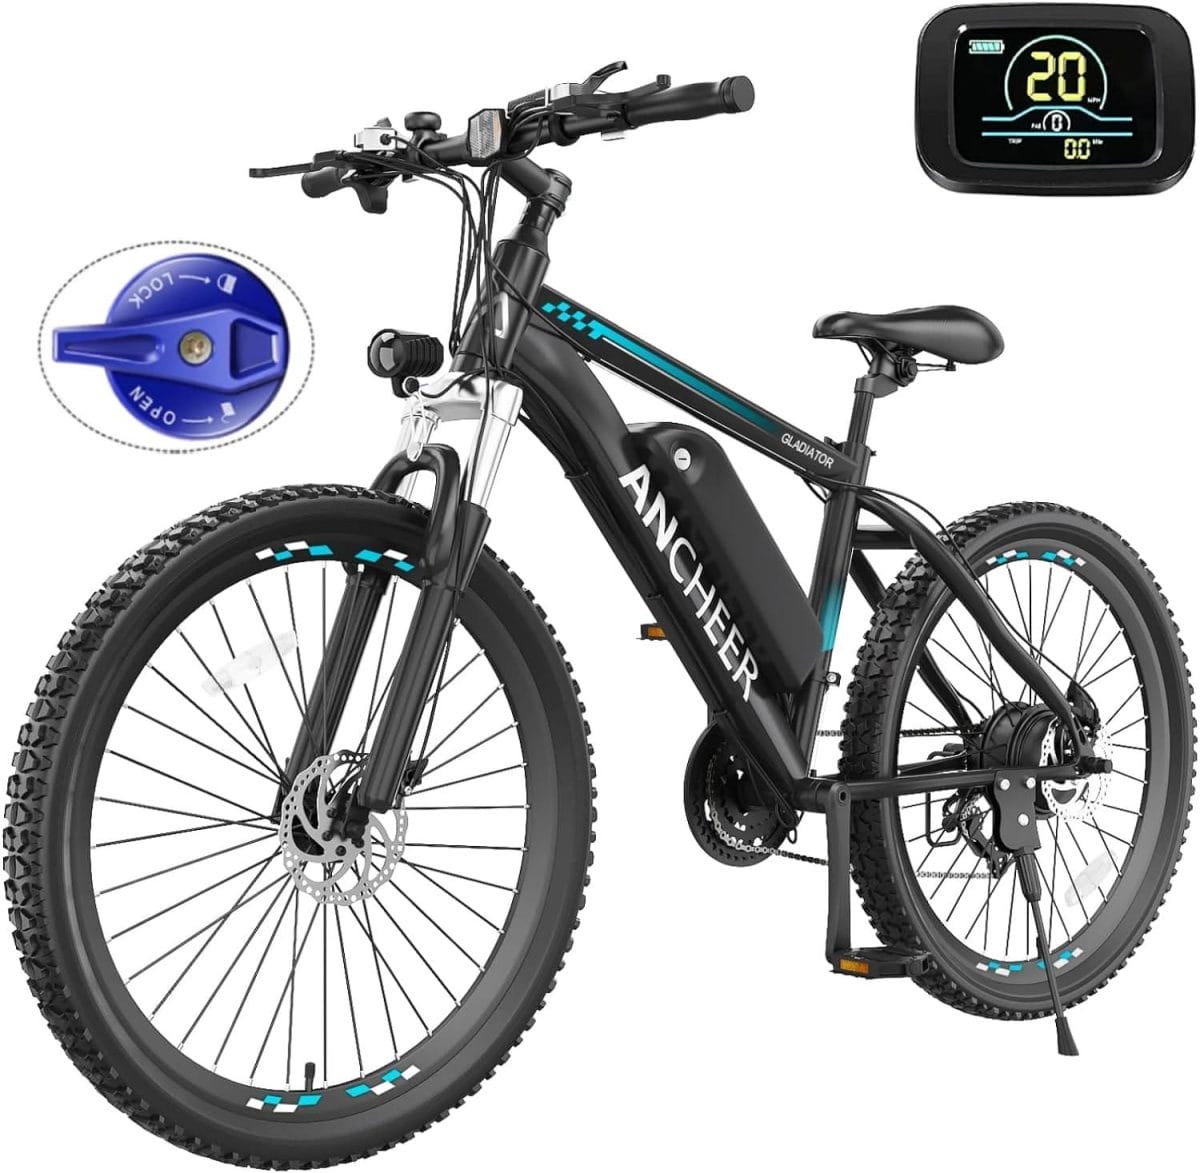 ANCHEER 500W Electric Bike 26 Gladiator Electric Mountain Bike, 48V 10.4Ah Removable Battery, Up to 50 Miles, 3.5H Fast Charge, Cruise Control, Lockable Suspension Fork, 21Speed Ebike for Adults